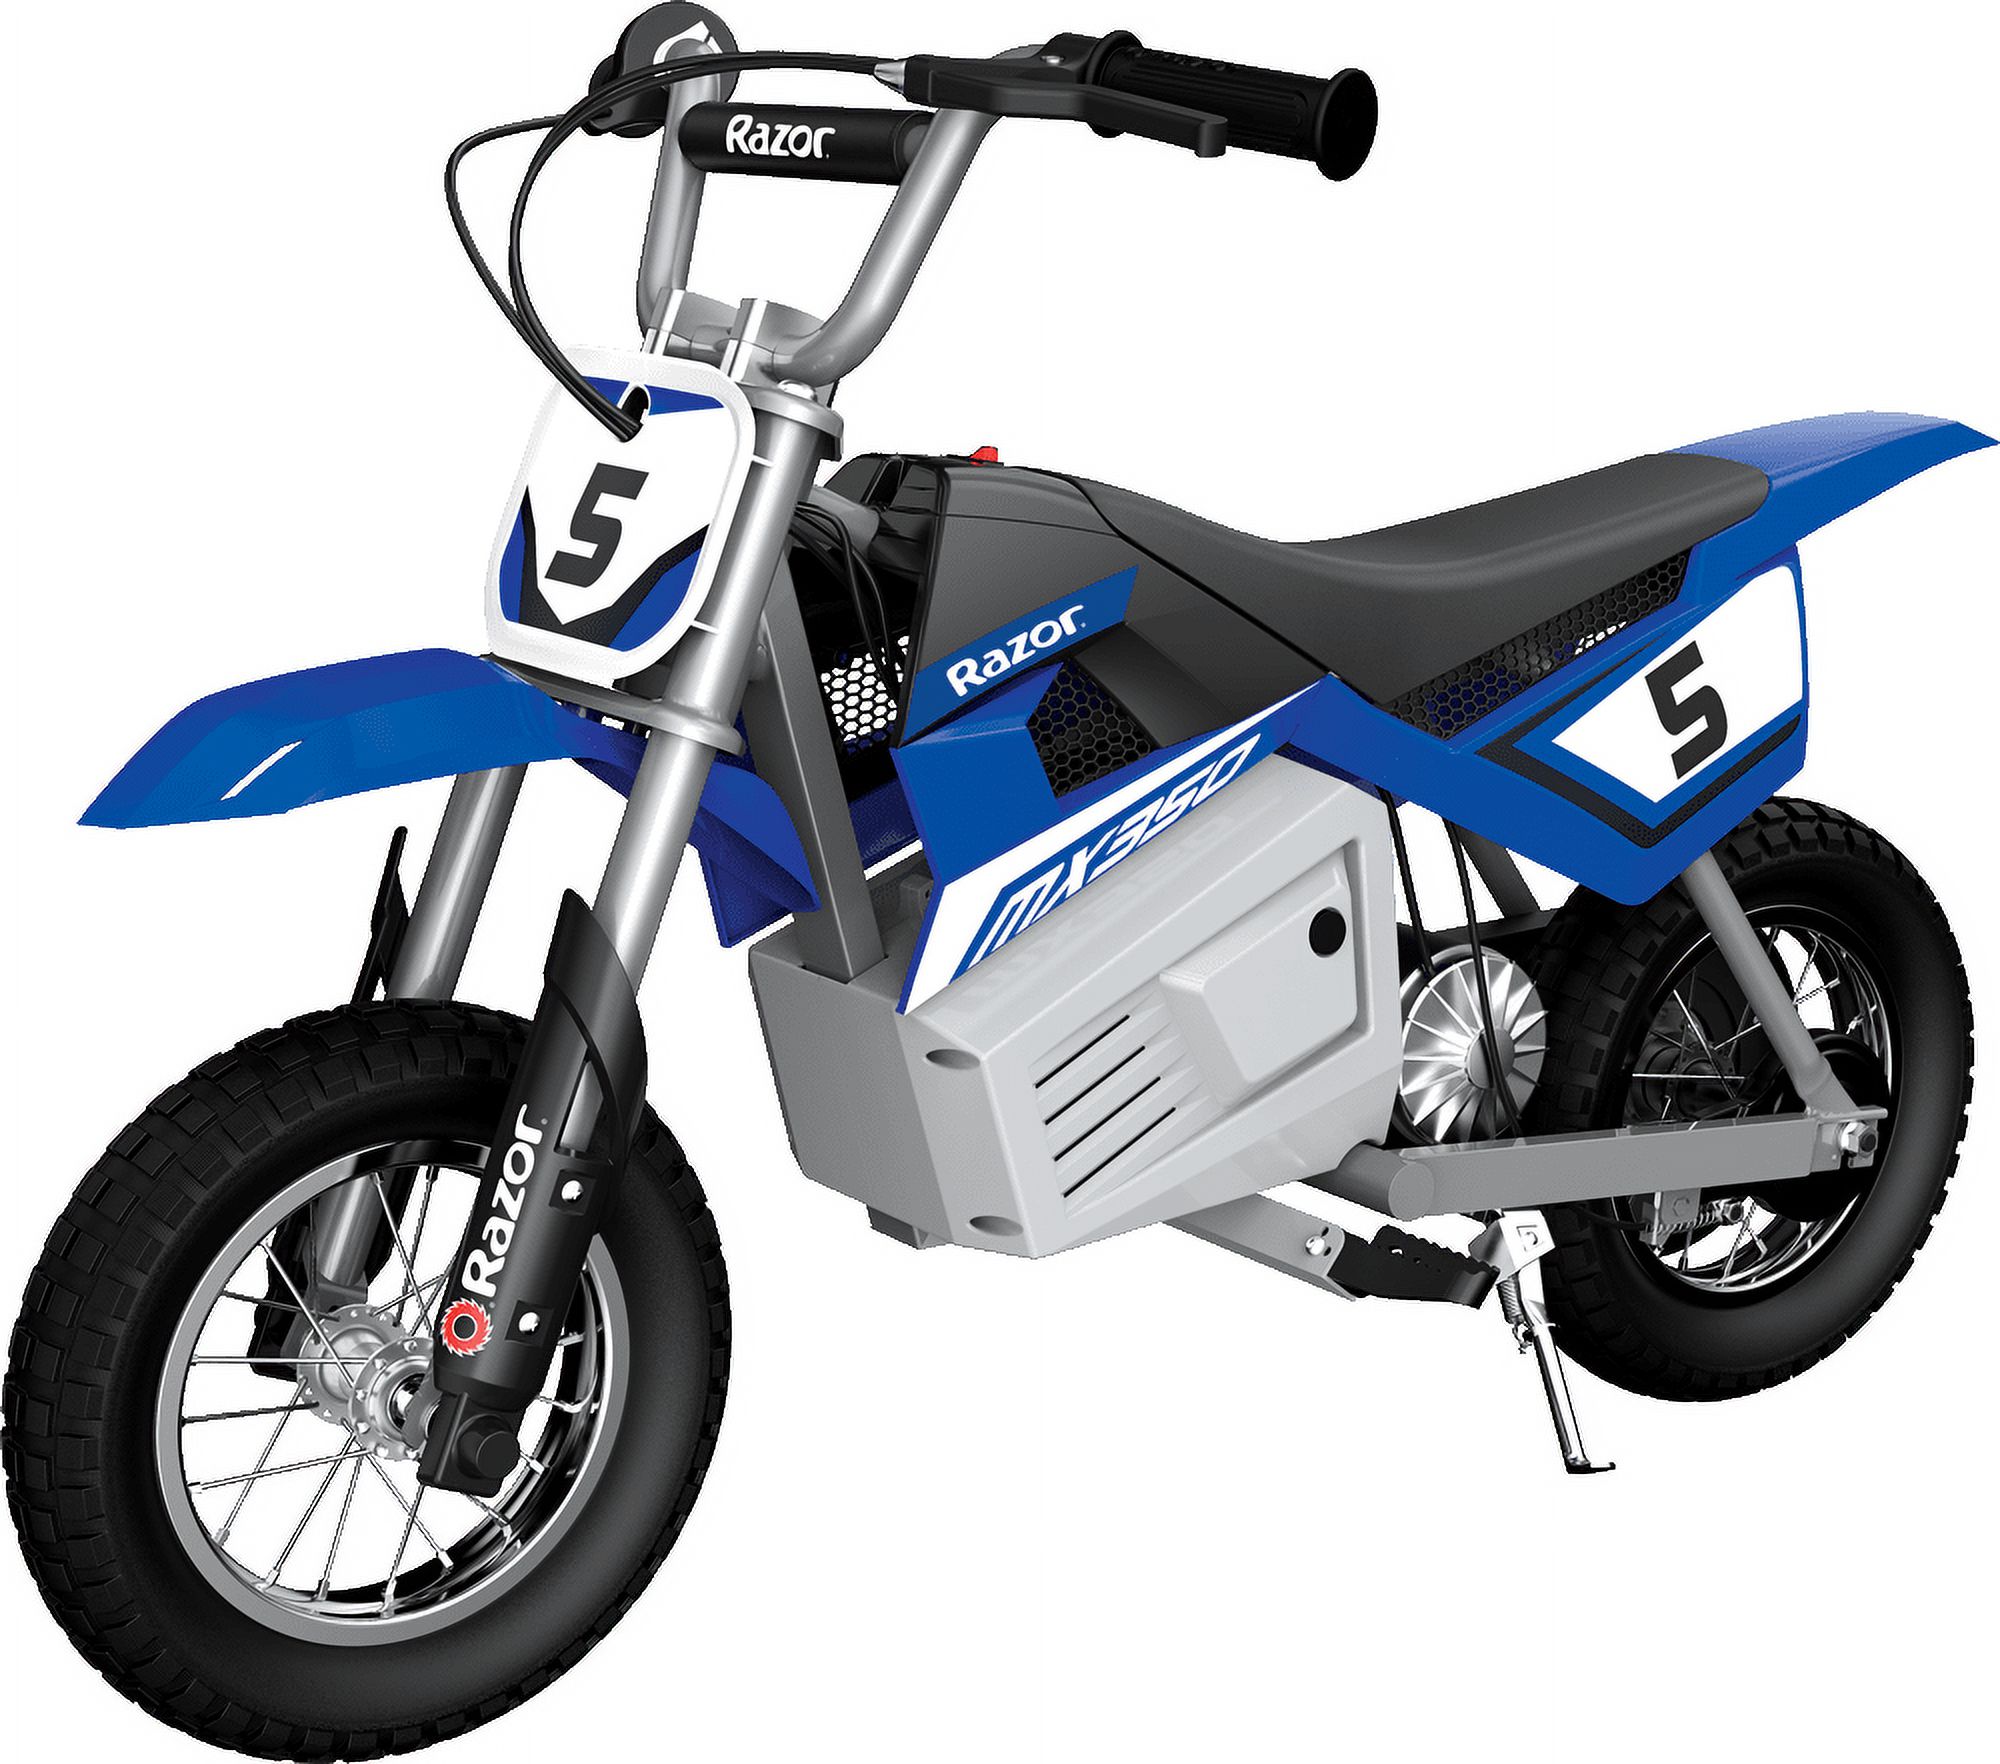 Razor Dirt Rocket MX350 - Blue, up to 14 mph, 24V Electric-Powered Dirt Bike for Kids 13+ - image 1 of 11